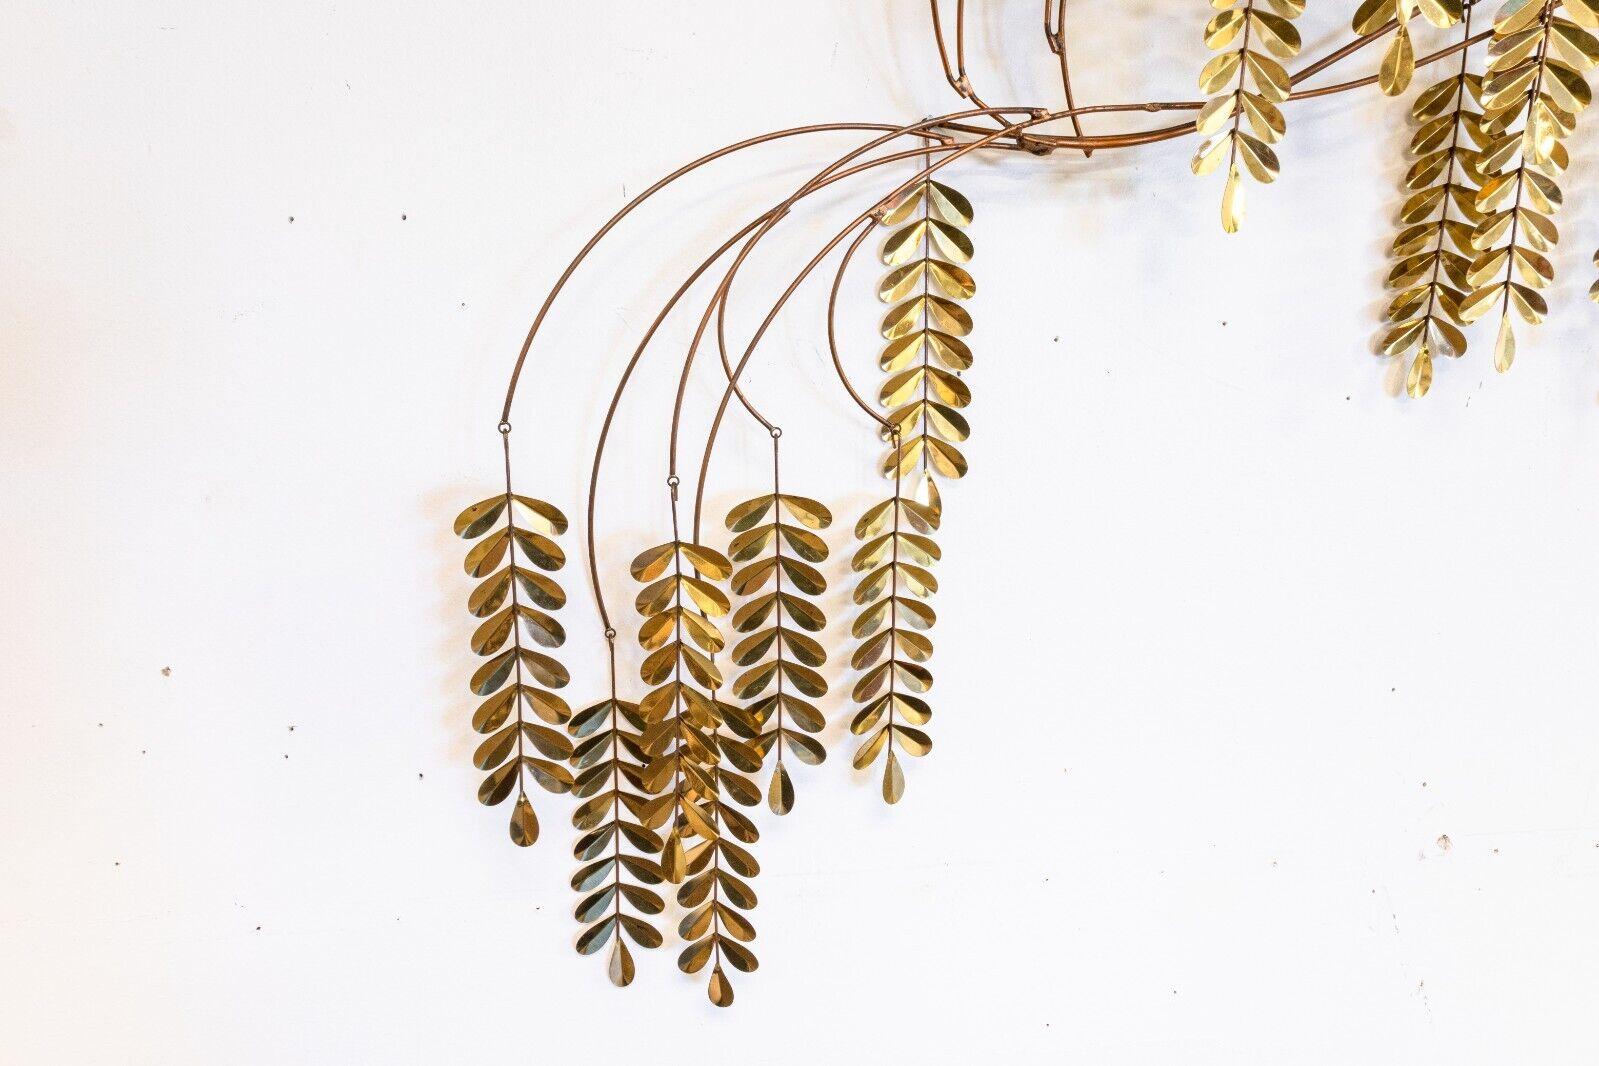 A signed 1985 Curtis Jere Brass Hanging Willow Tree Wall Sculpture. An absolutely wonderful kinetic brass wall sculpture of a willow tree. This piece features large brass rods polished hanging leaves. This piece is signed 